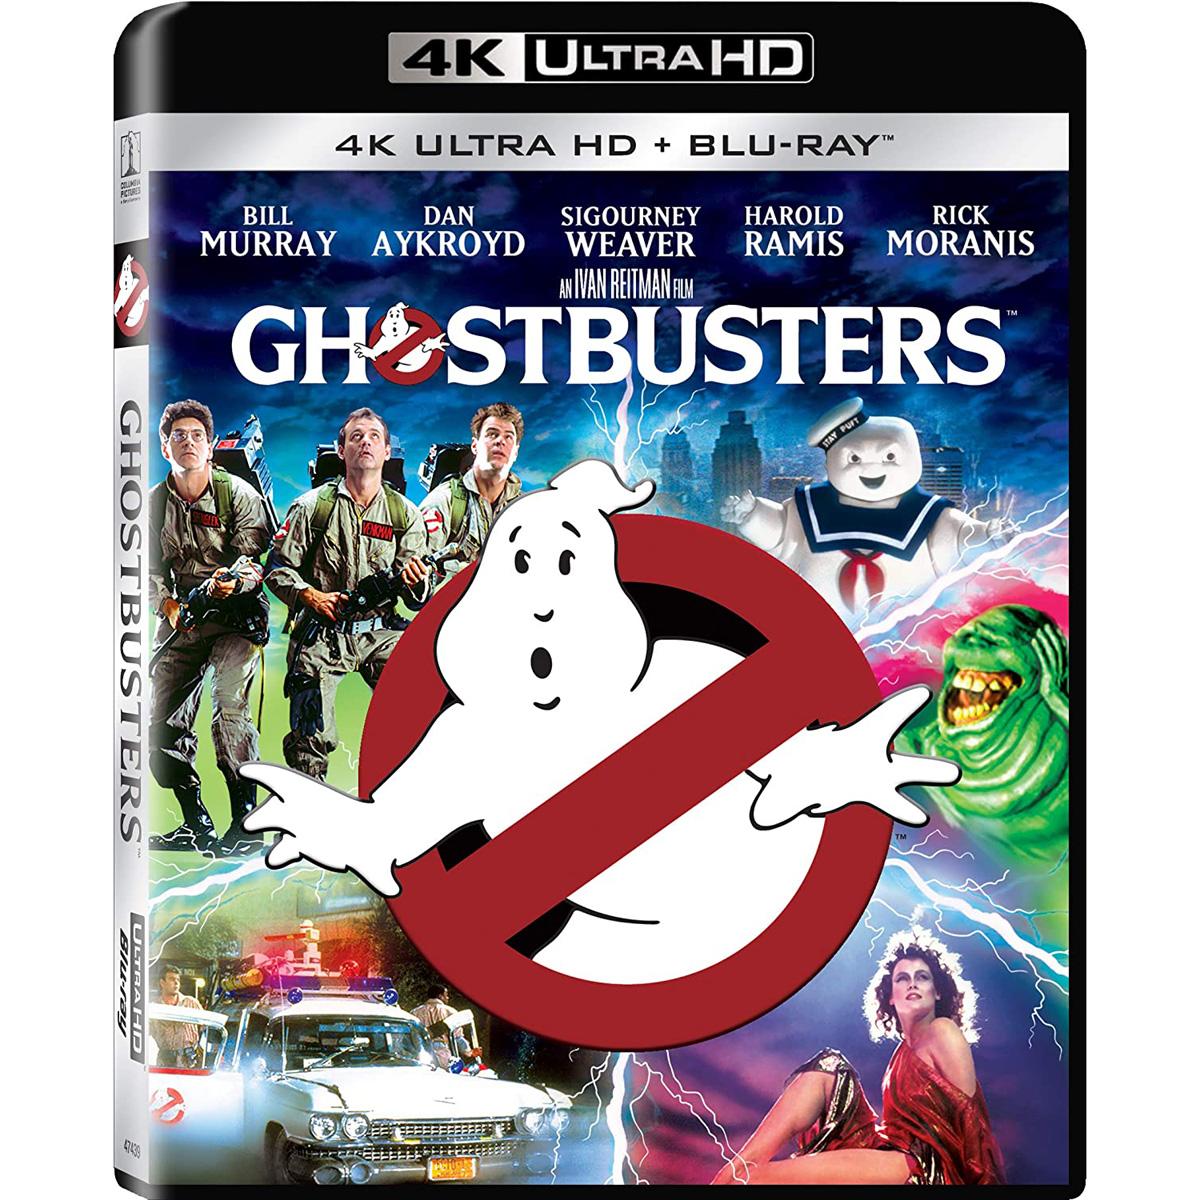 Ghostbusters 4K UHD Blu-ray for $13.33